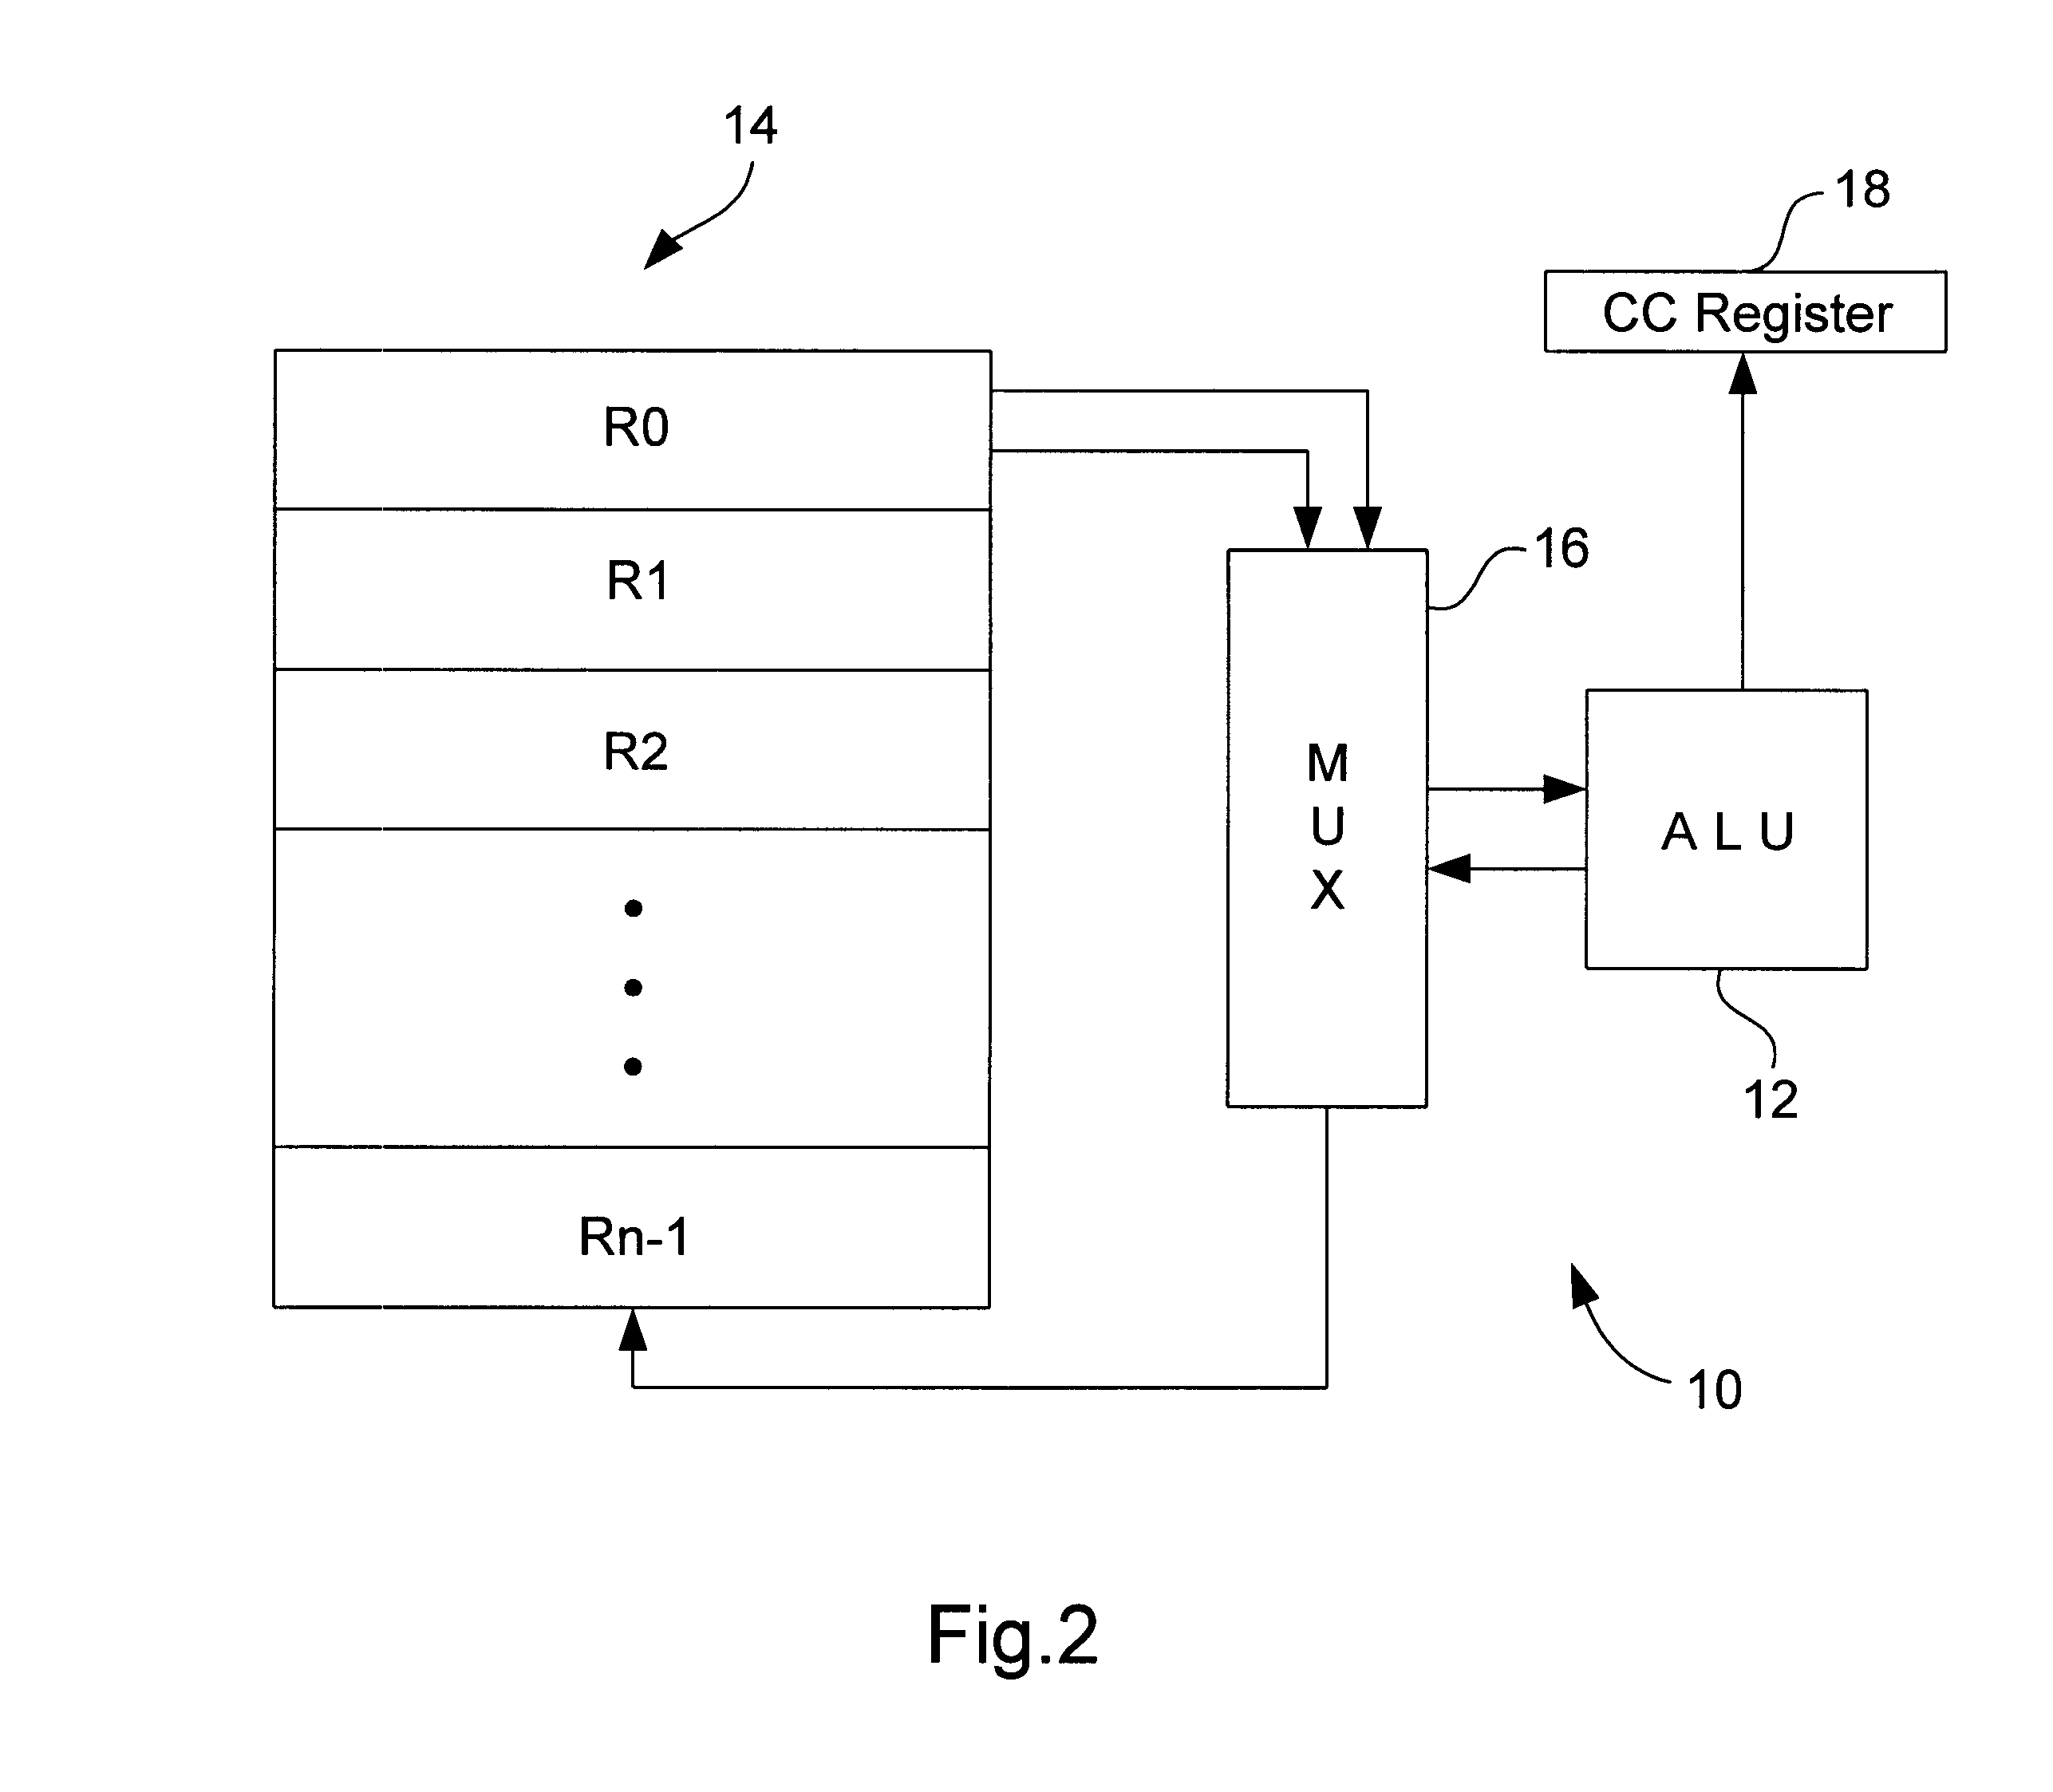 Apparatus and method for uniformly performing comparison operations on long word operands